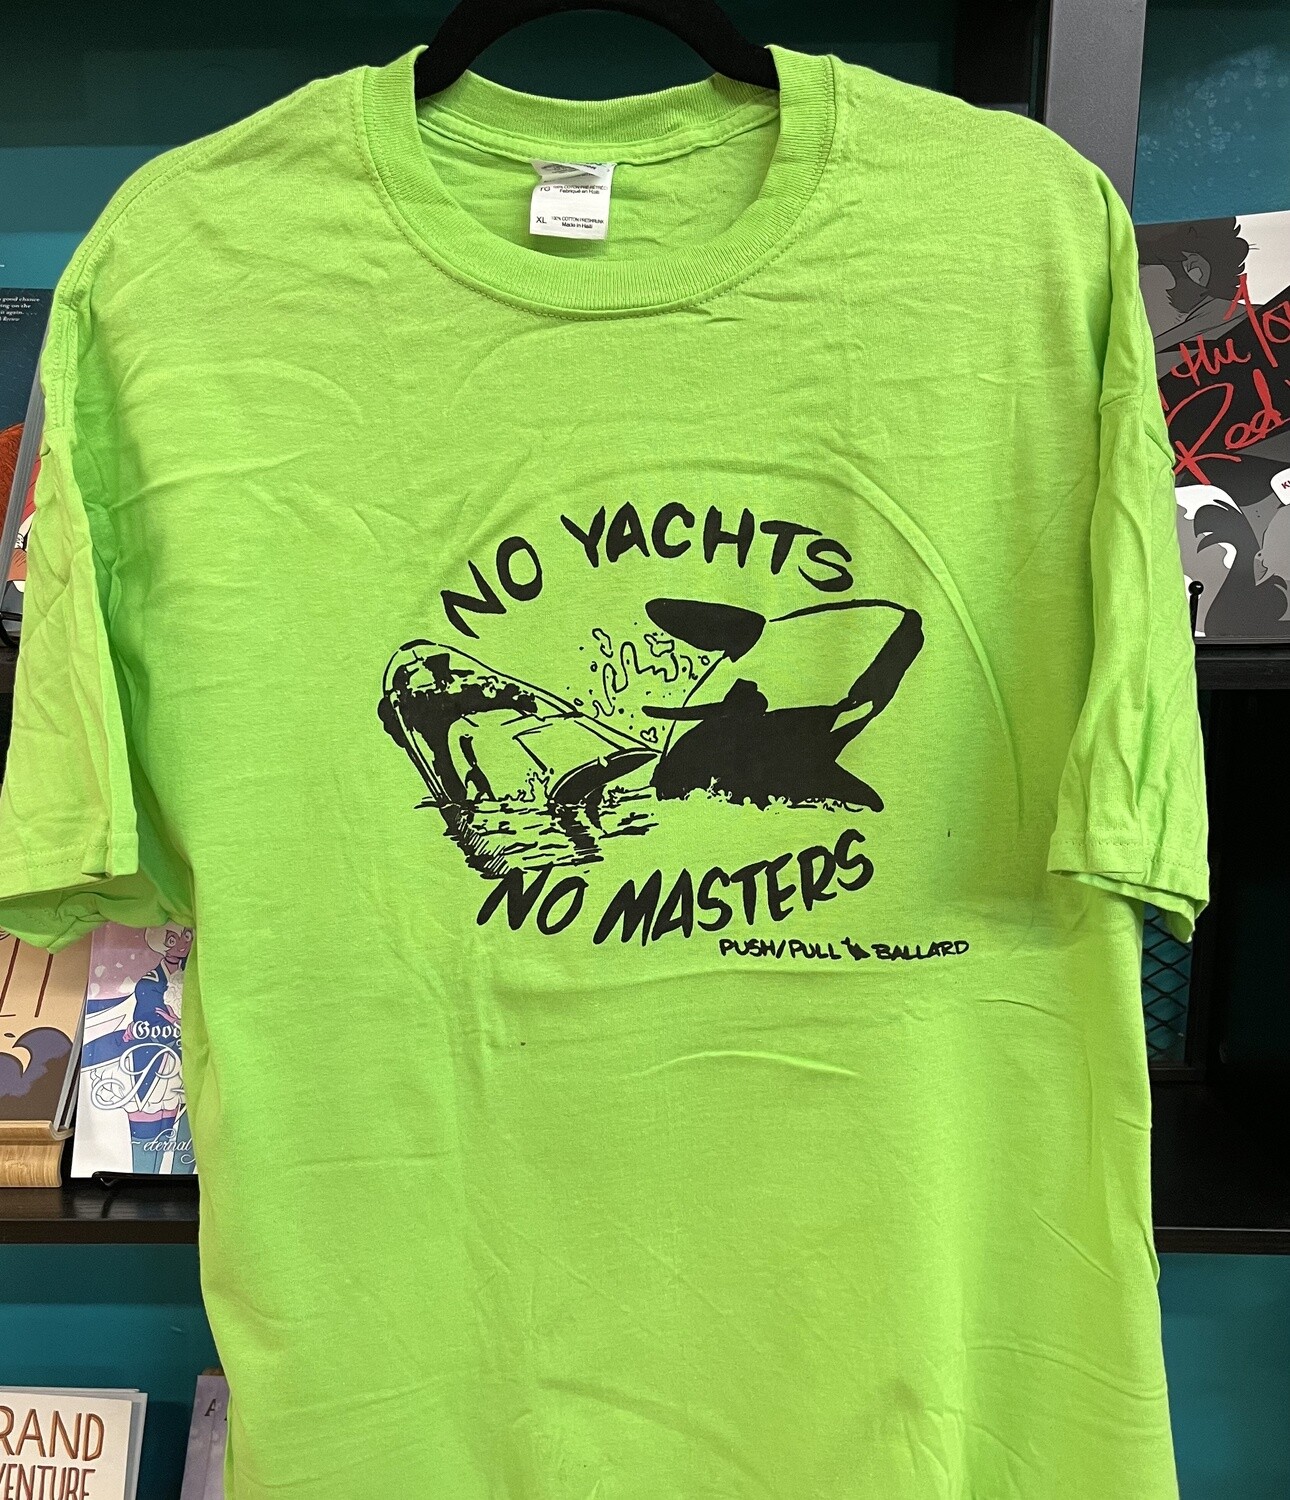 NO YACHTS, NO MASTERS, Fluorescent Green T-Shirt, made by Push/Pull